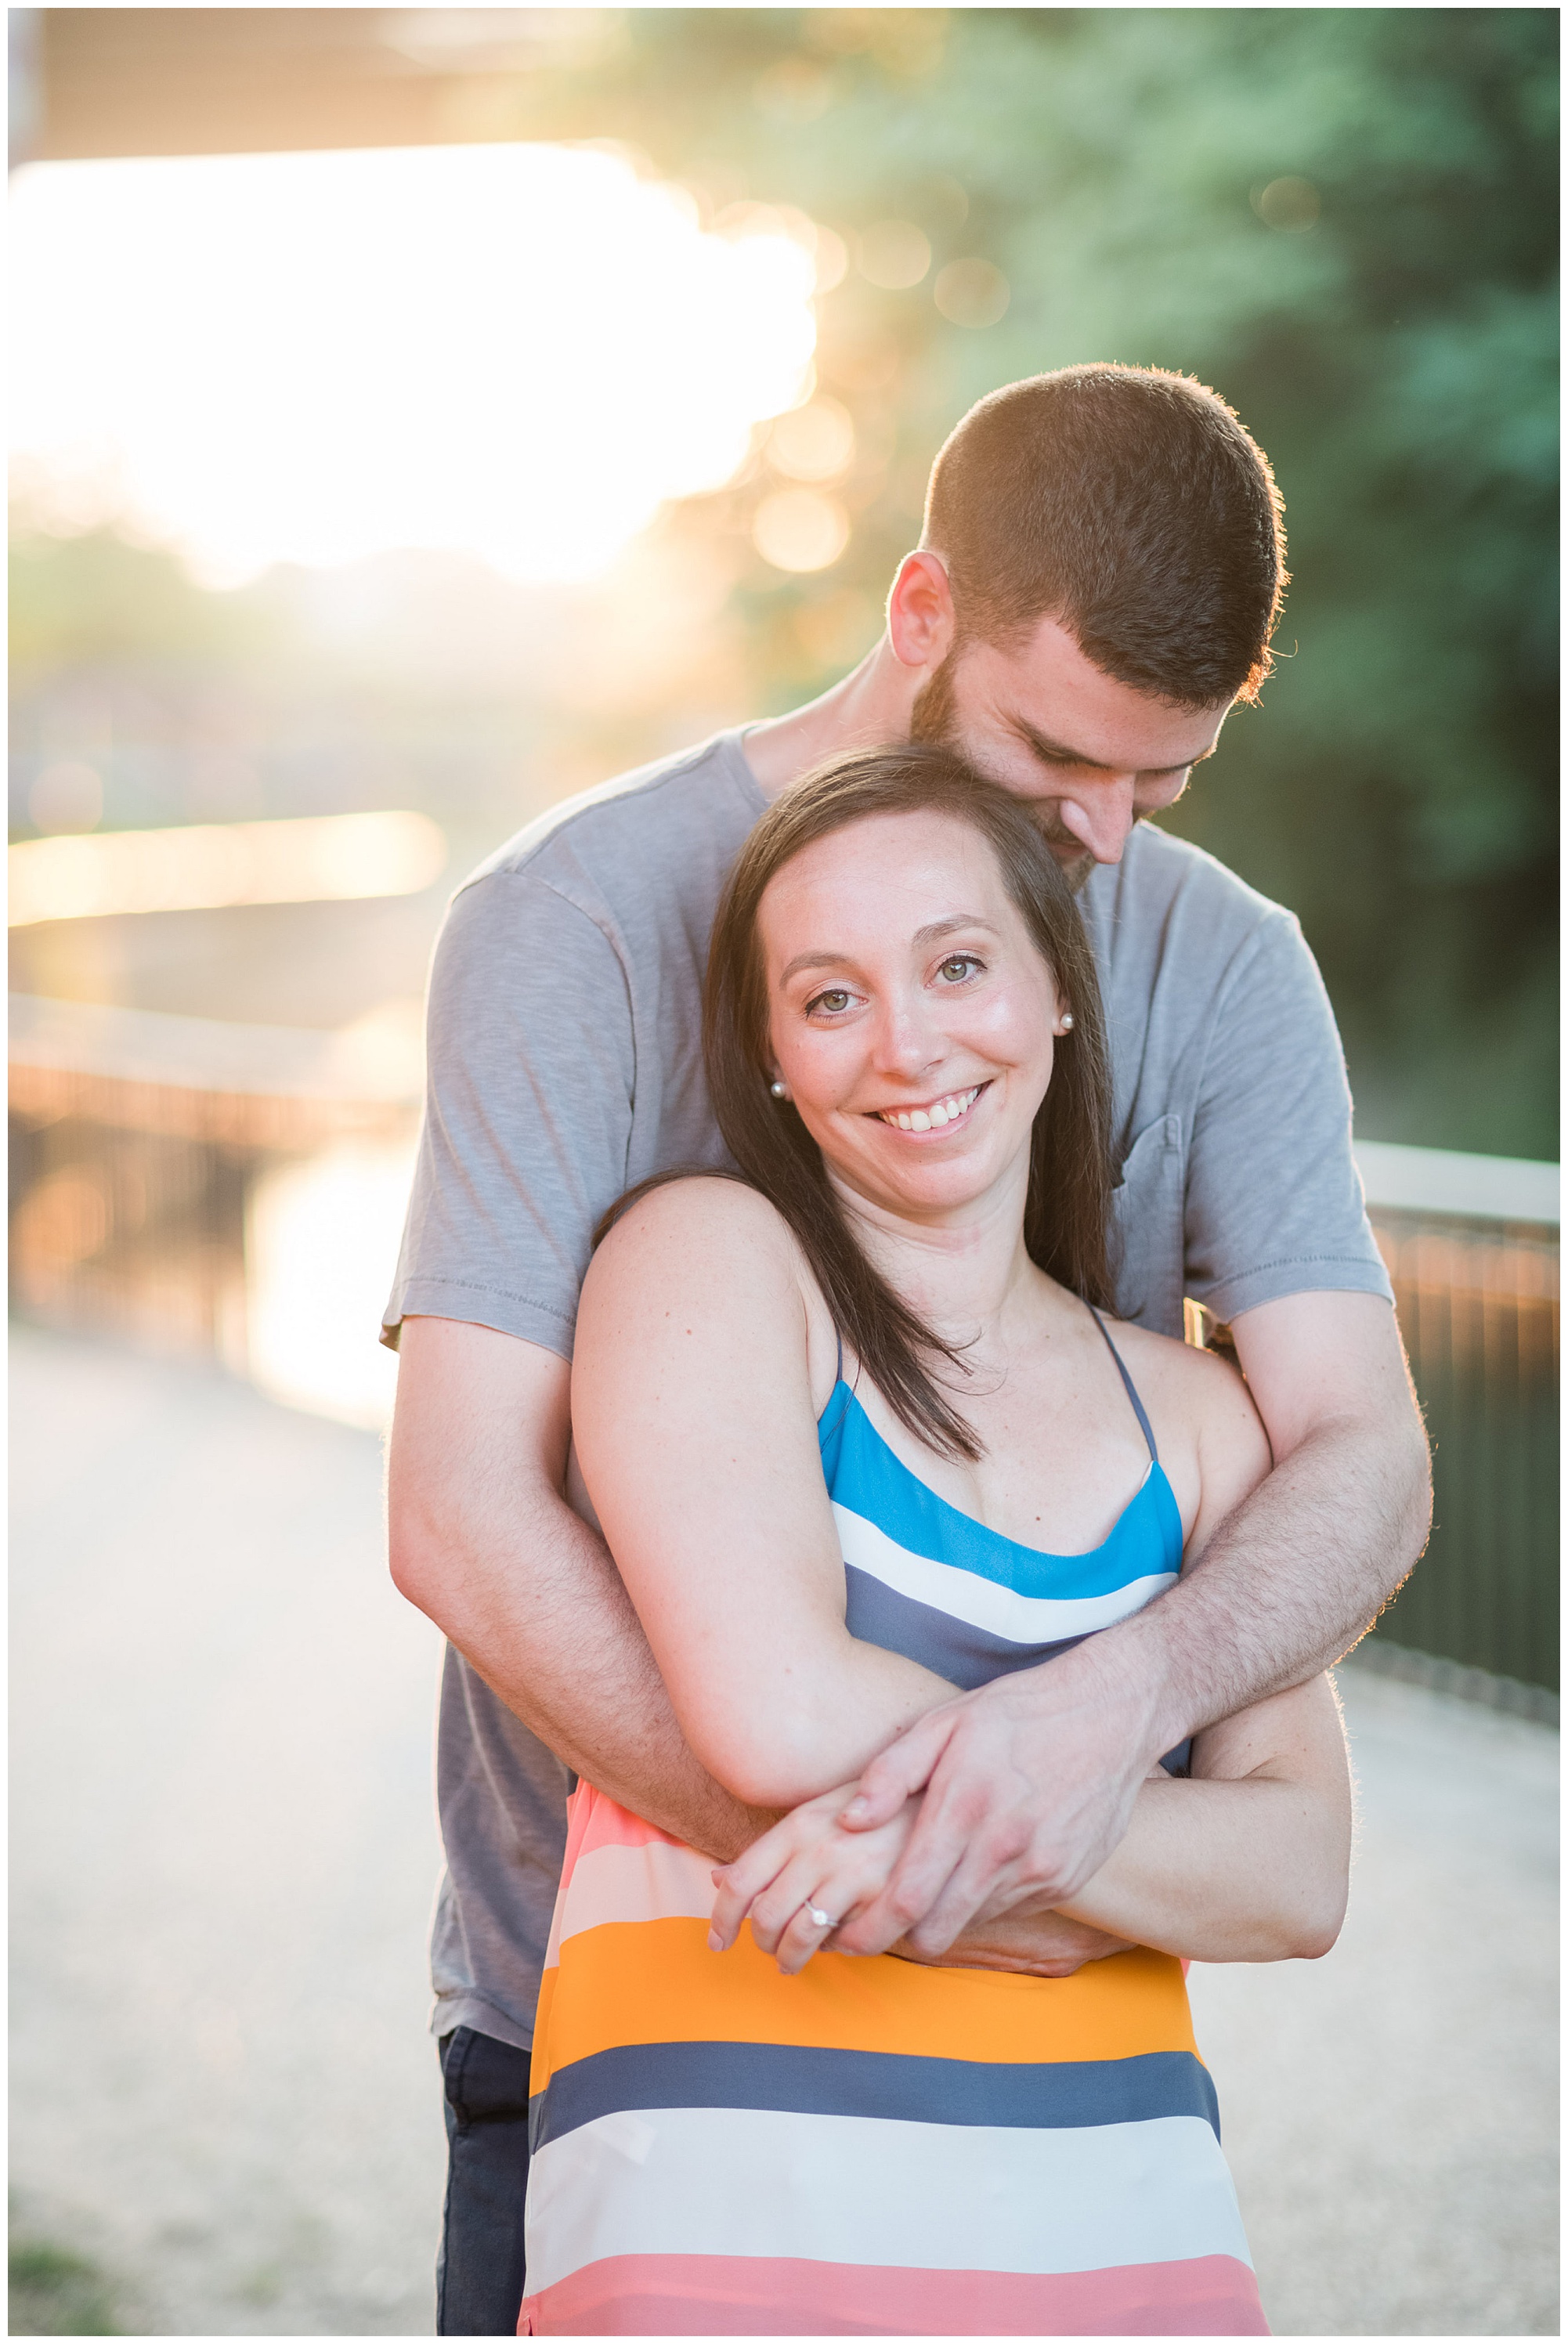 perfect golden hour sunset engagement session at canal walk in richmond virginia in the spring in may